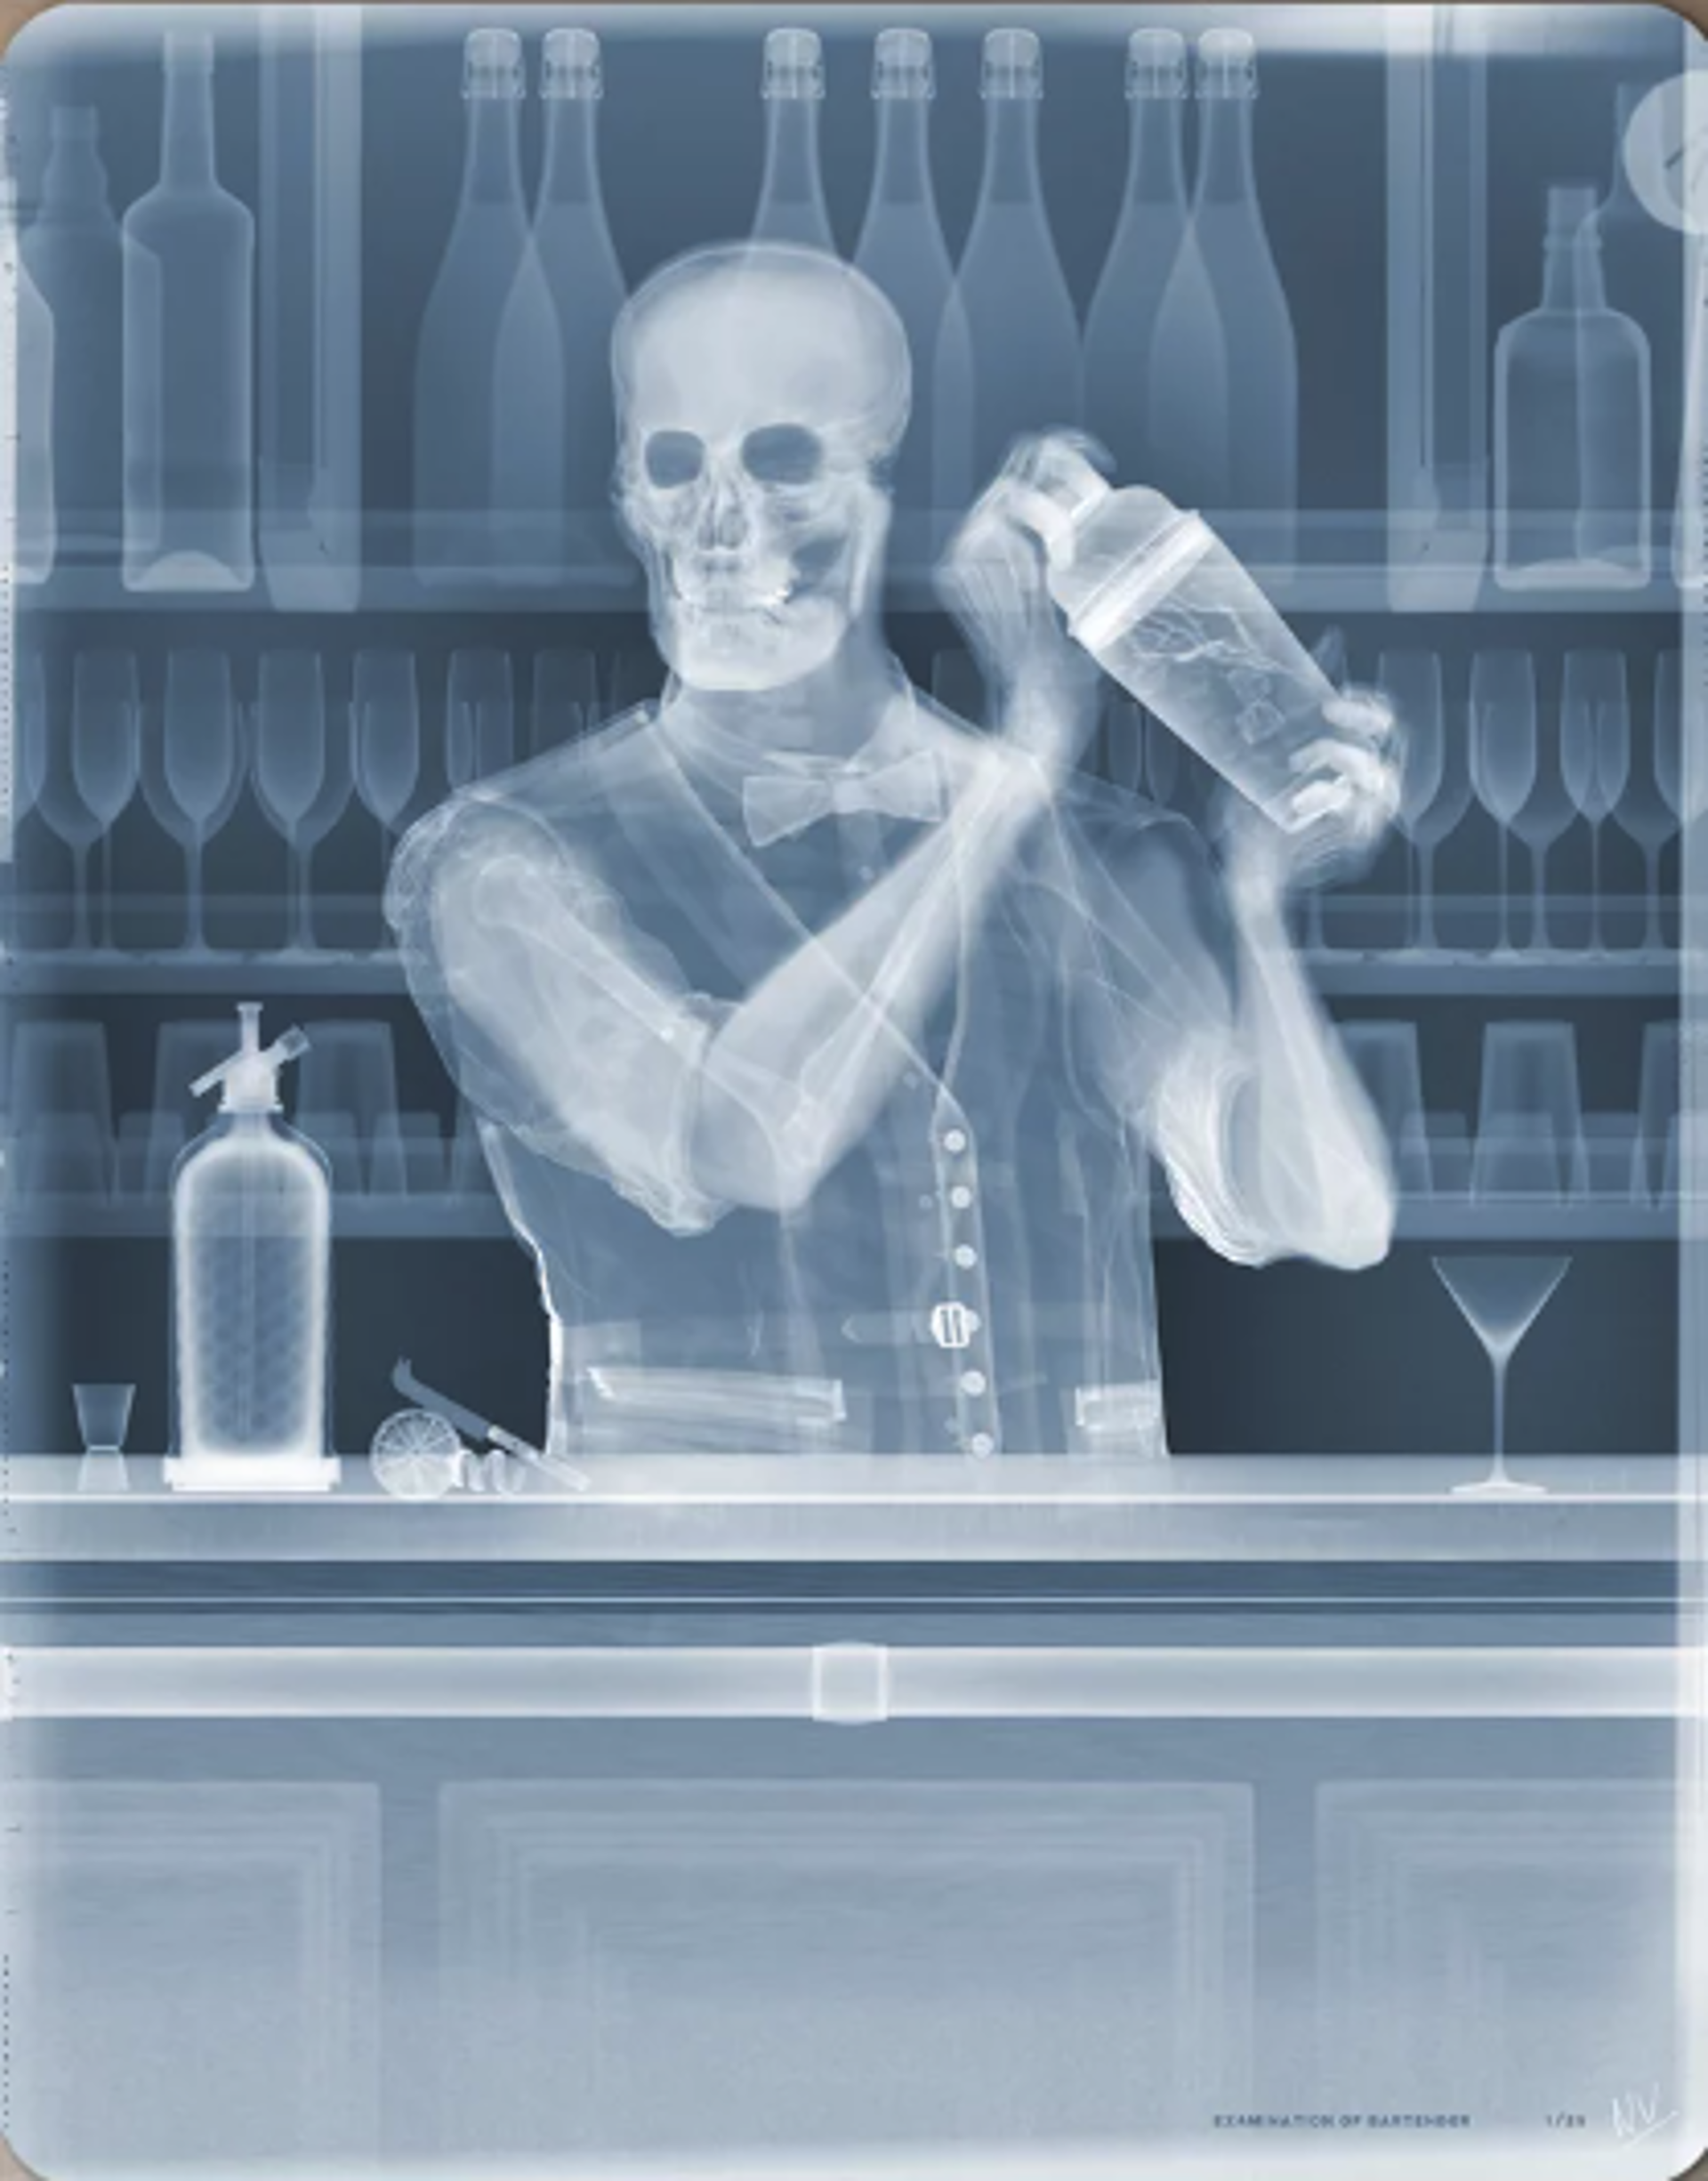 Examination of Bartender by Nick Veasey